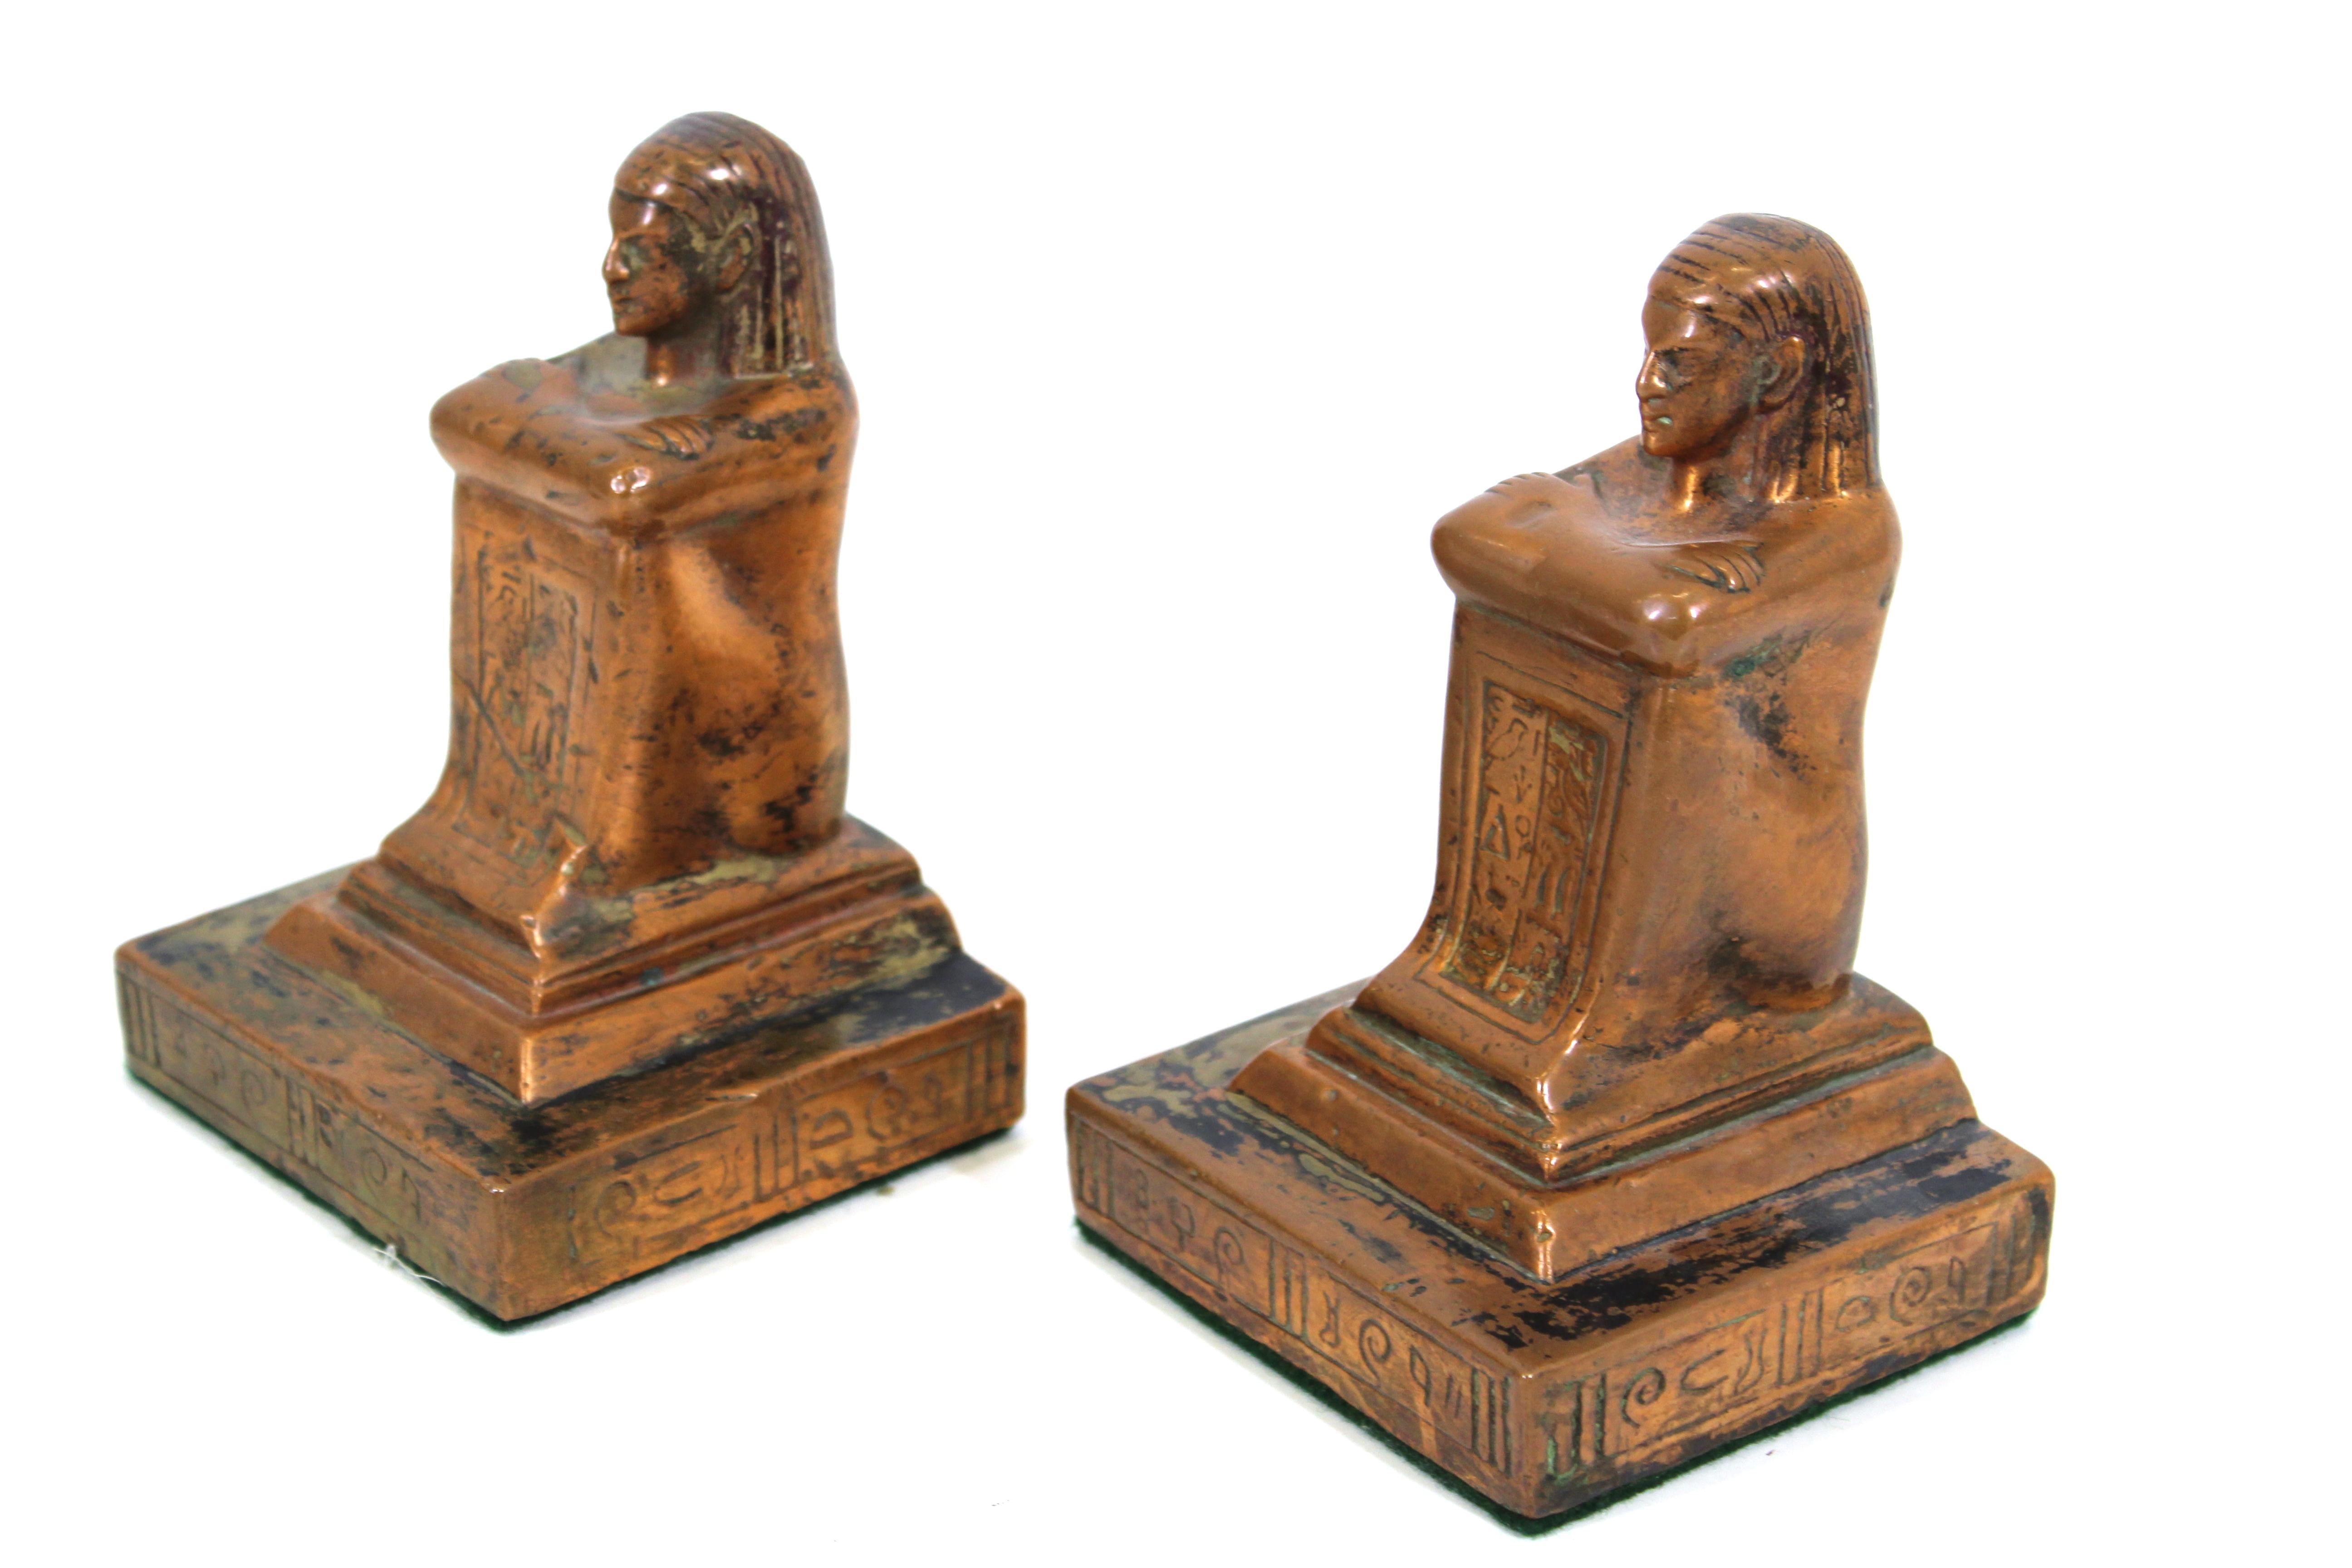 Egyptian Revival style pair of figurative bookends in weighted brass